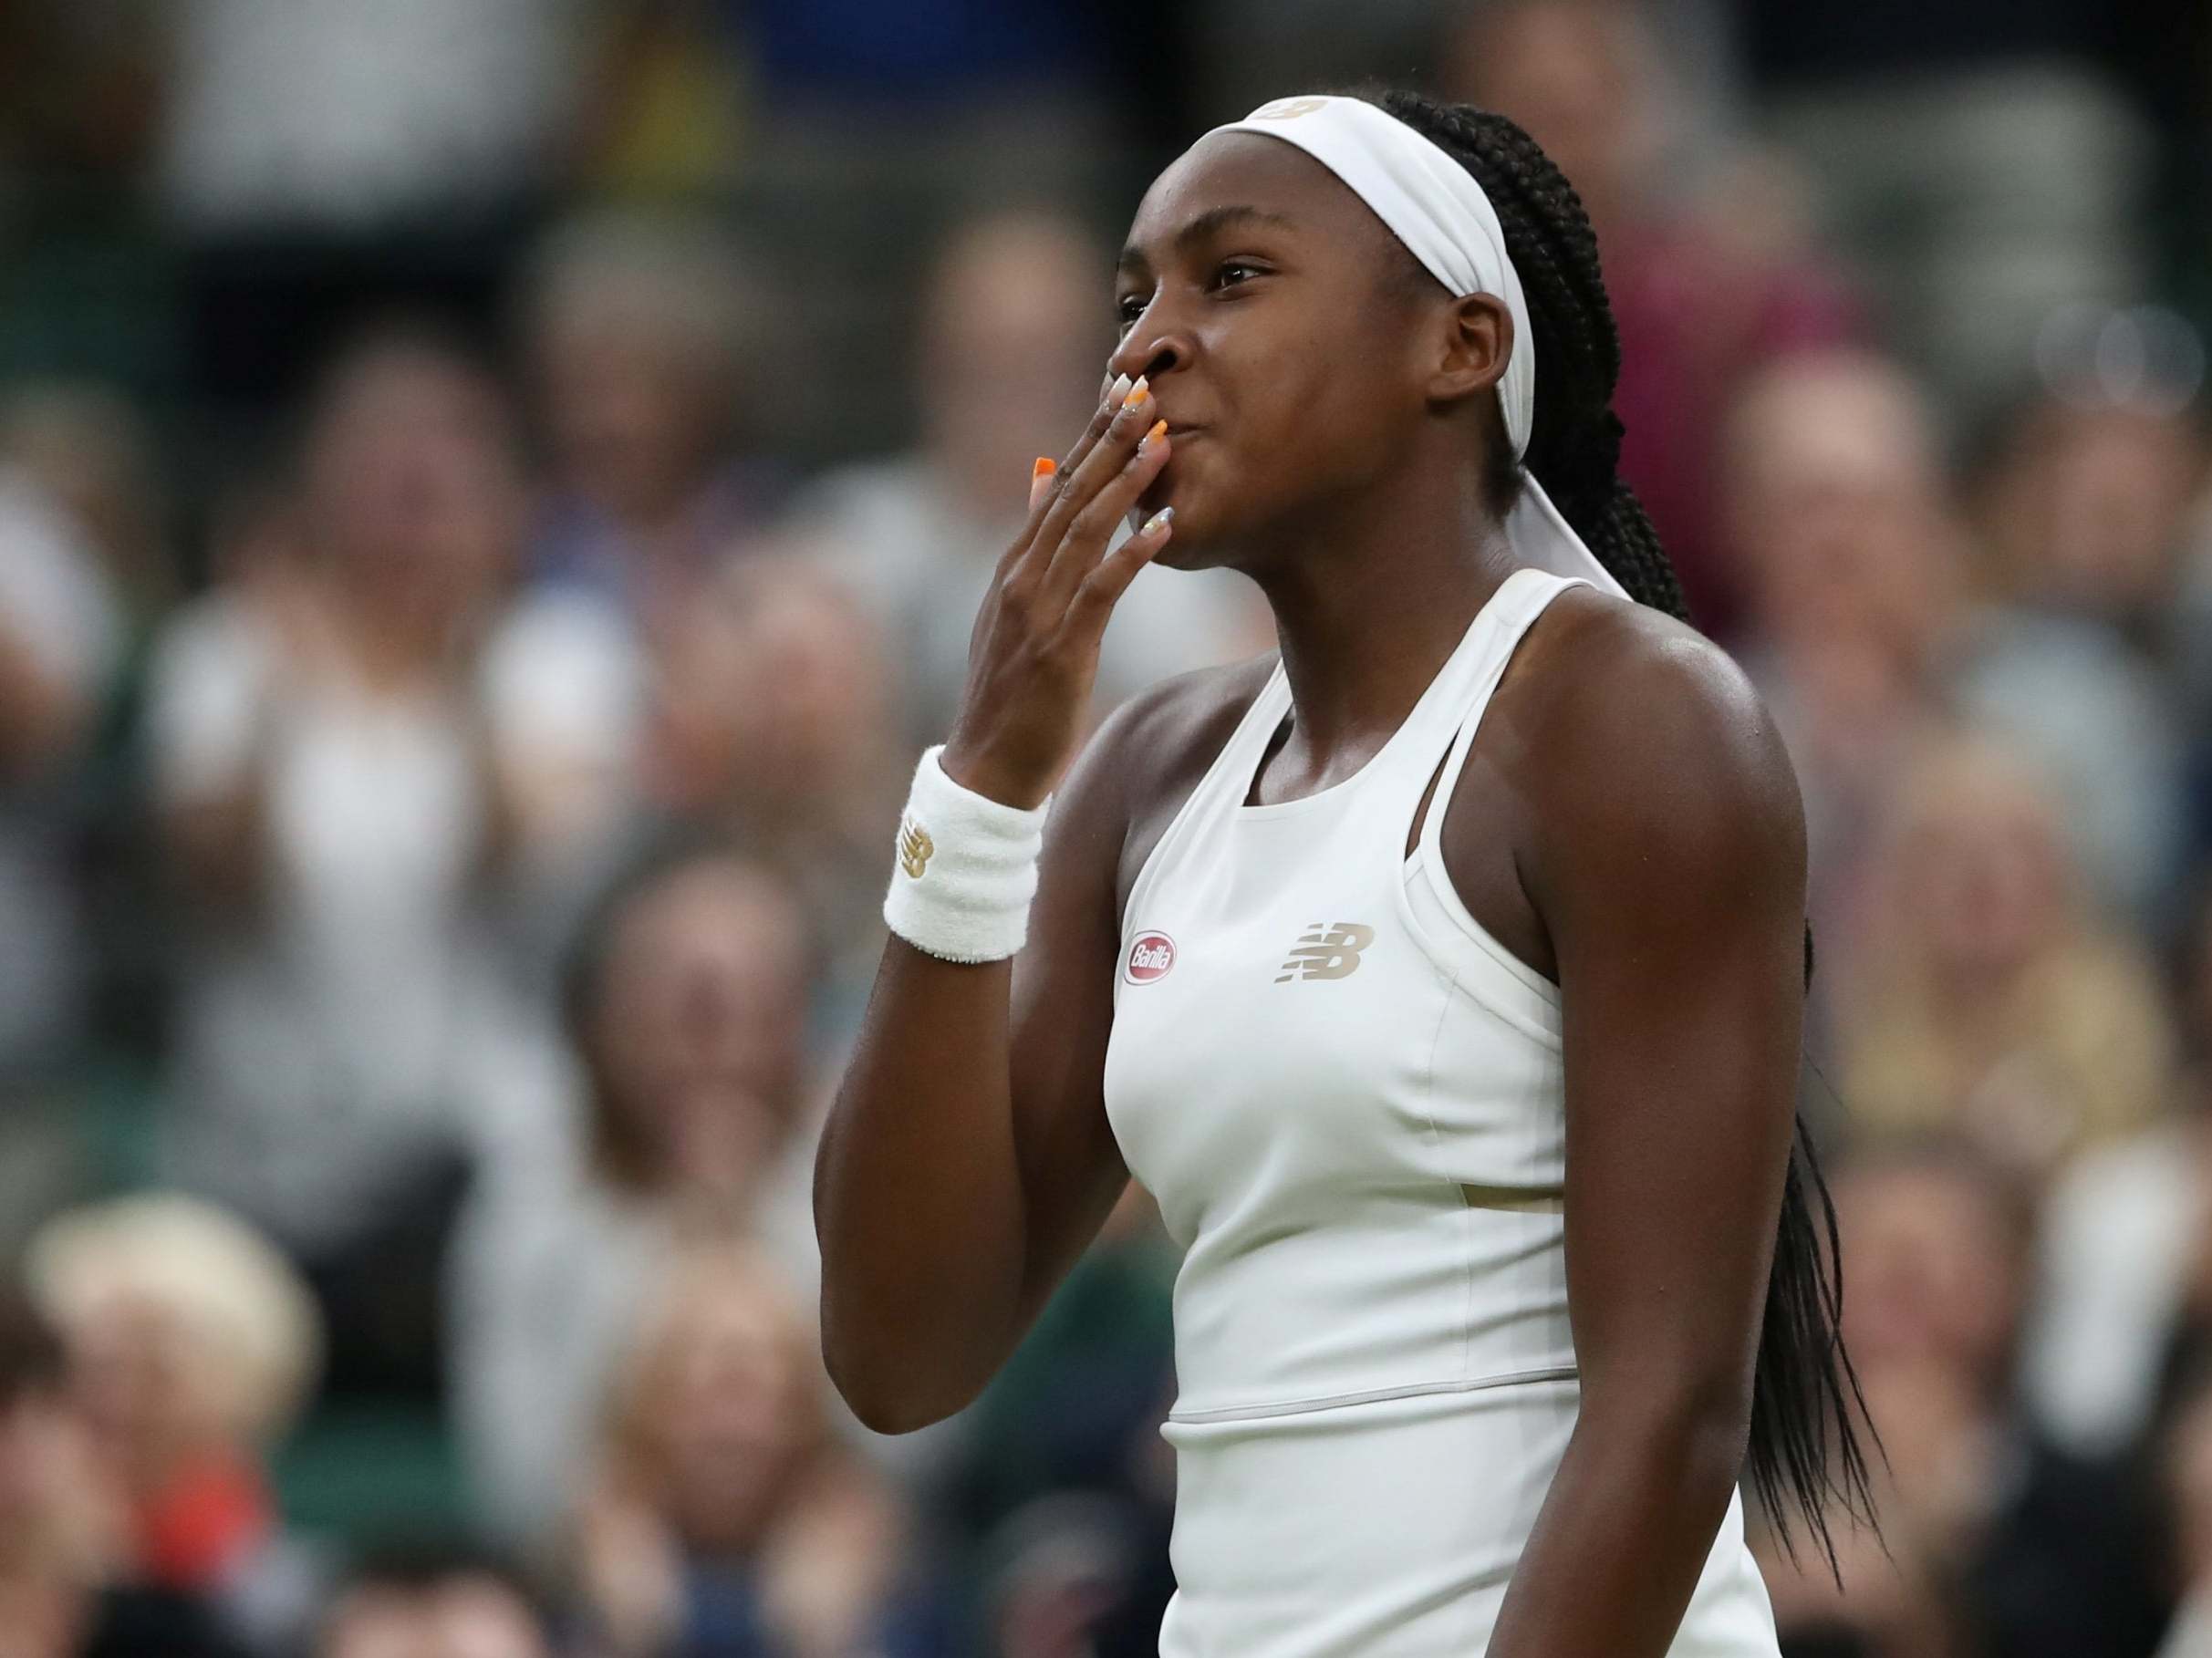 Cori Gauff is adjusting to her new-found fame at Wimbledon